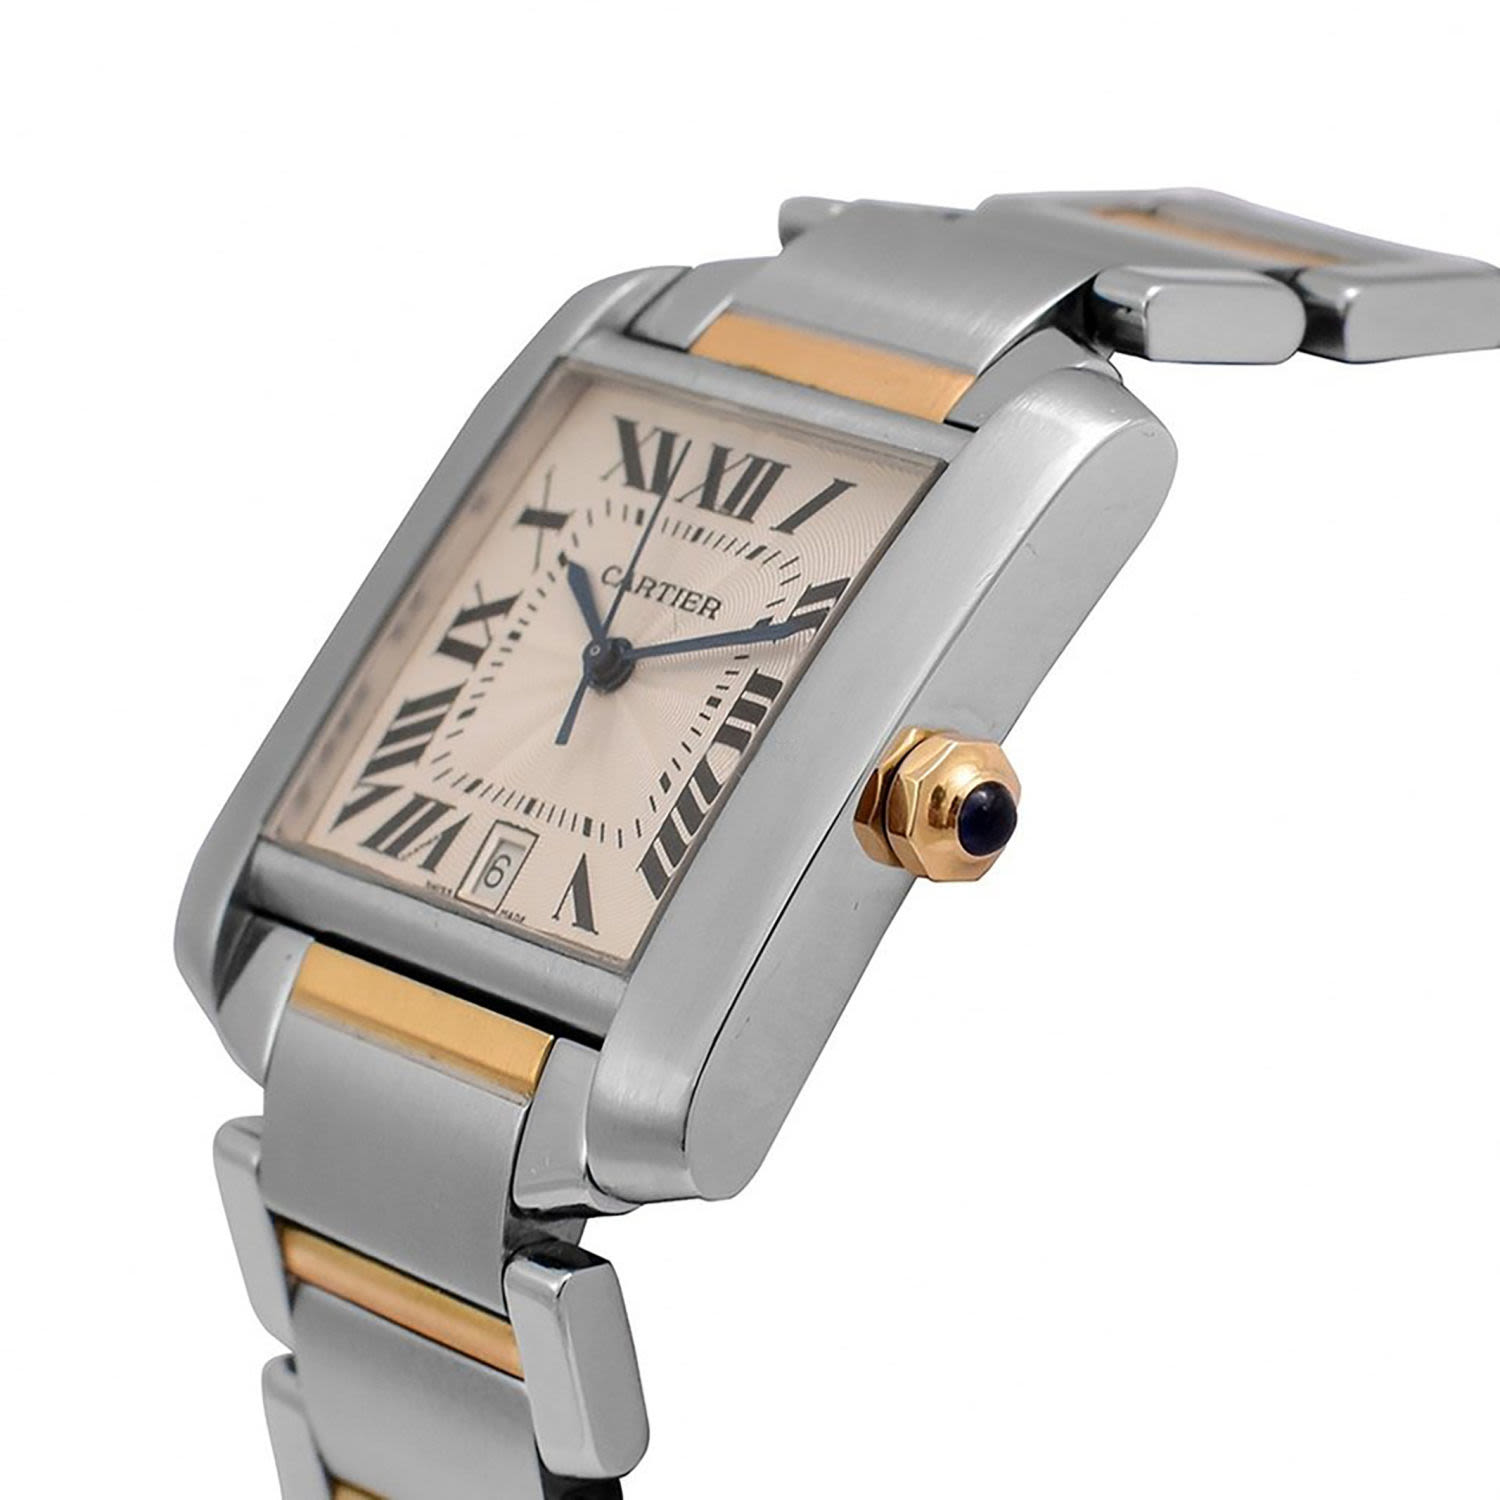 Cartier steel and gold wristwatch Tank Française model in steel and 18k gold - Image 2 of 6